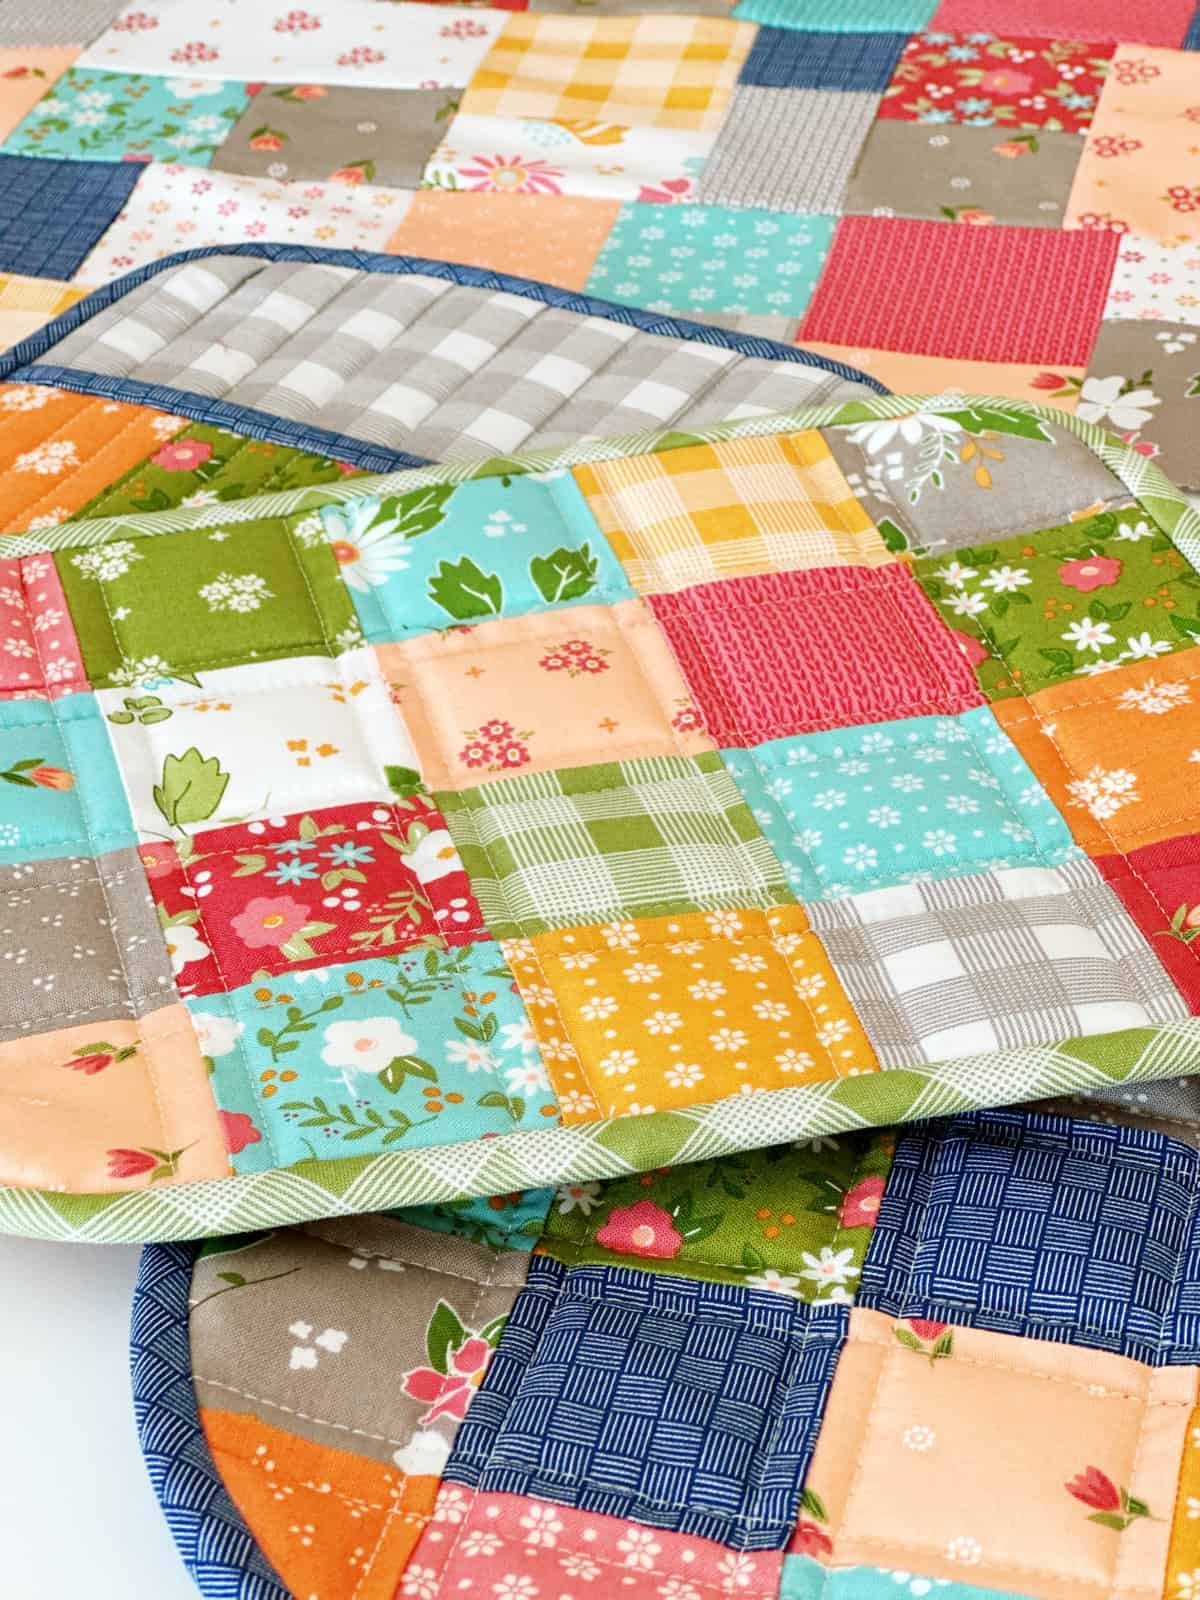 patchwork quilted potholders in bright fall colors
